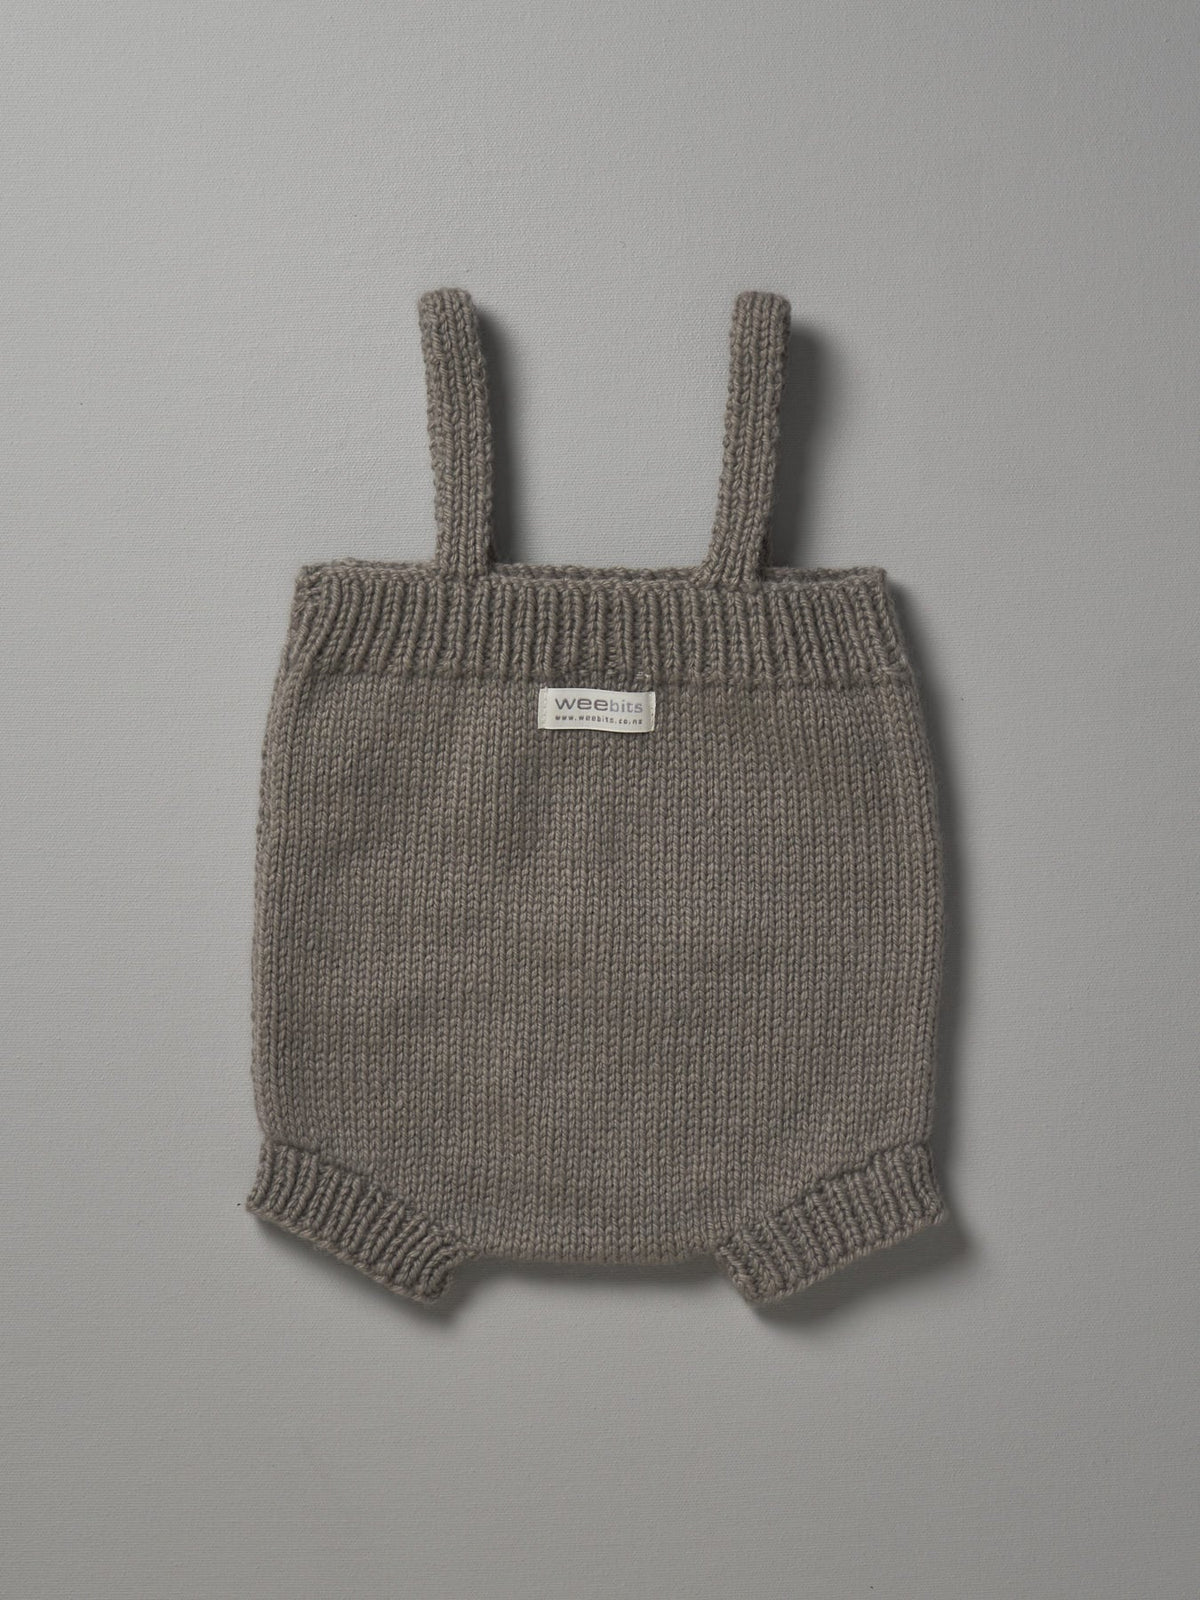 A Mushroom Weebits Hand Knitted Romper on a grey background.